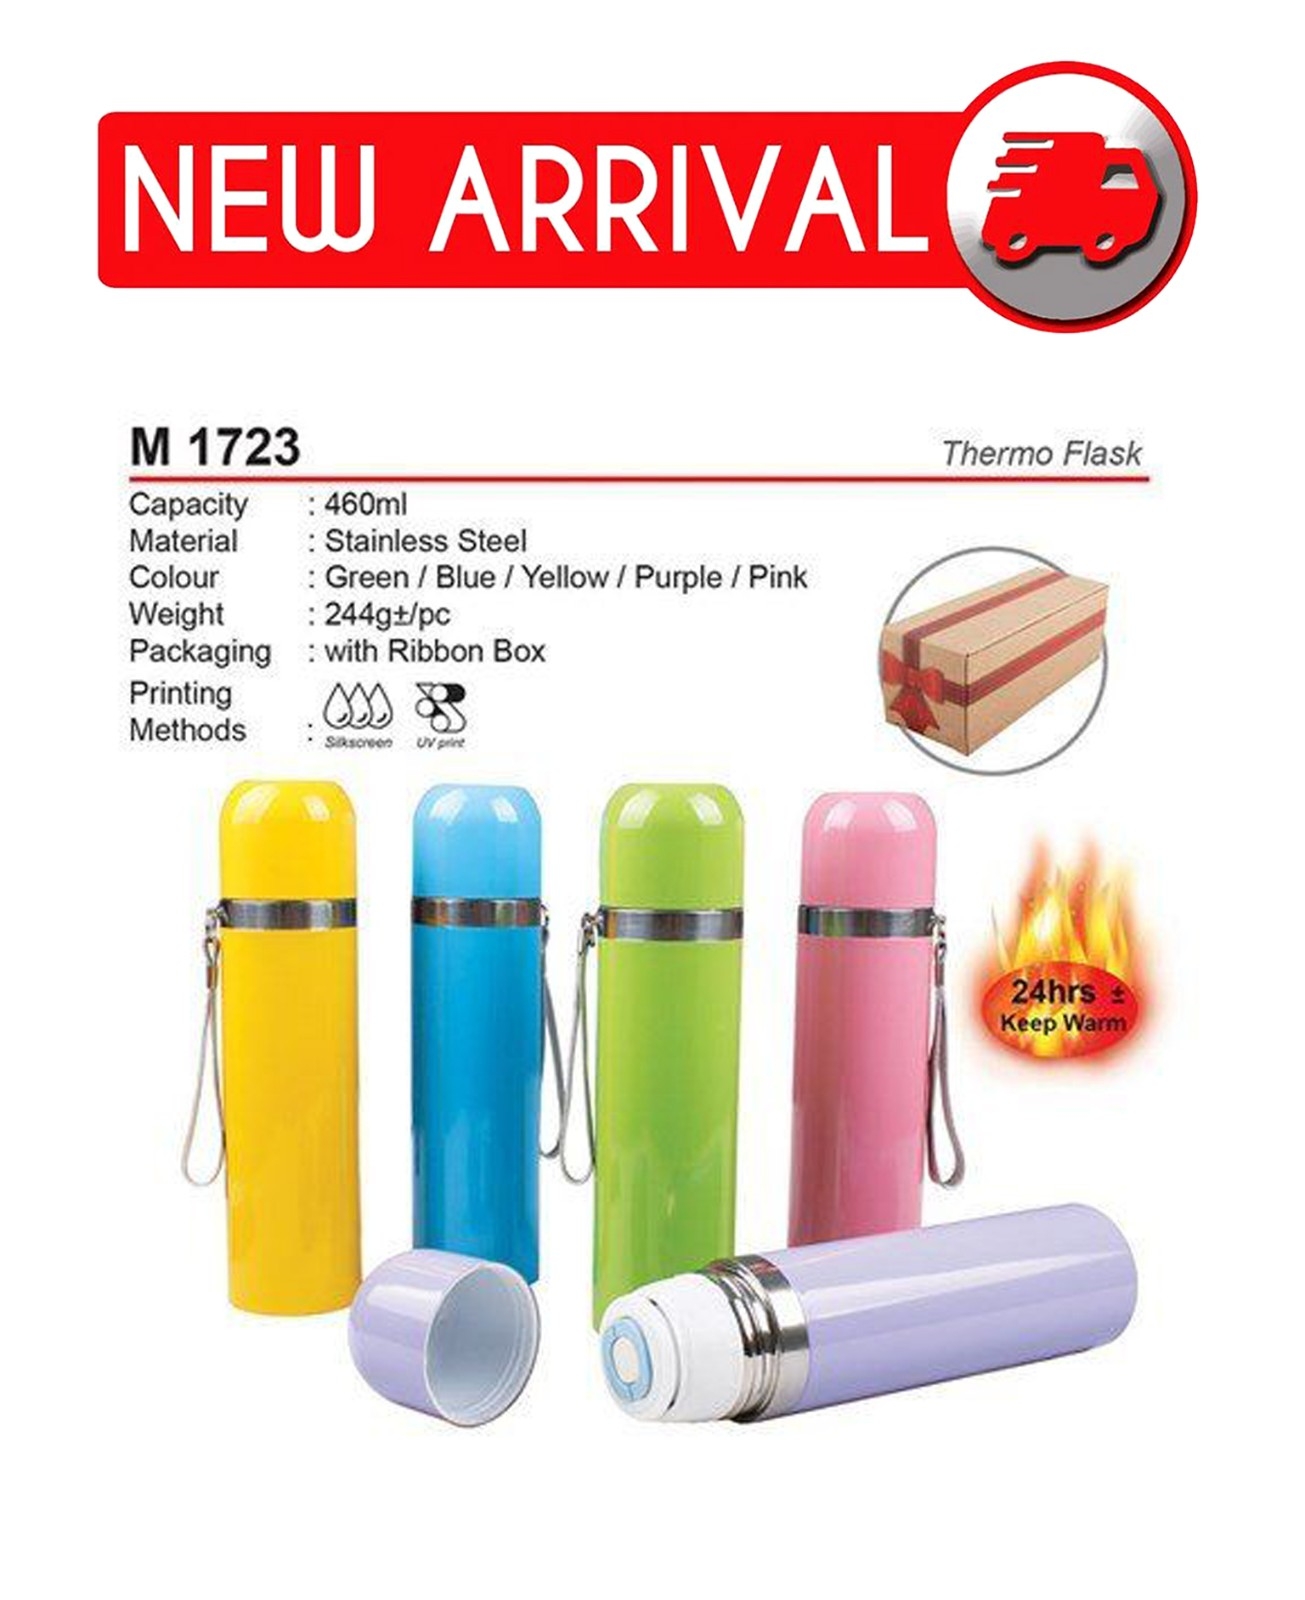 M1723 (Thermo Flask) (A)